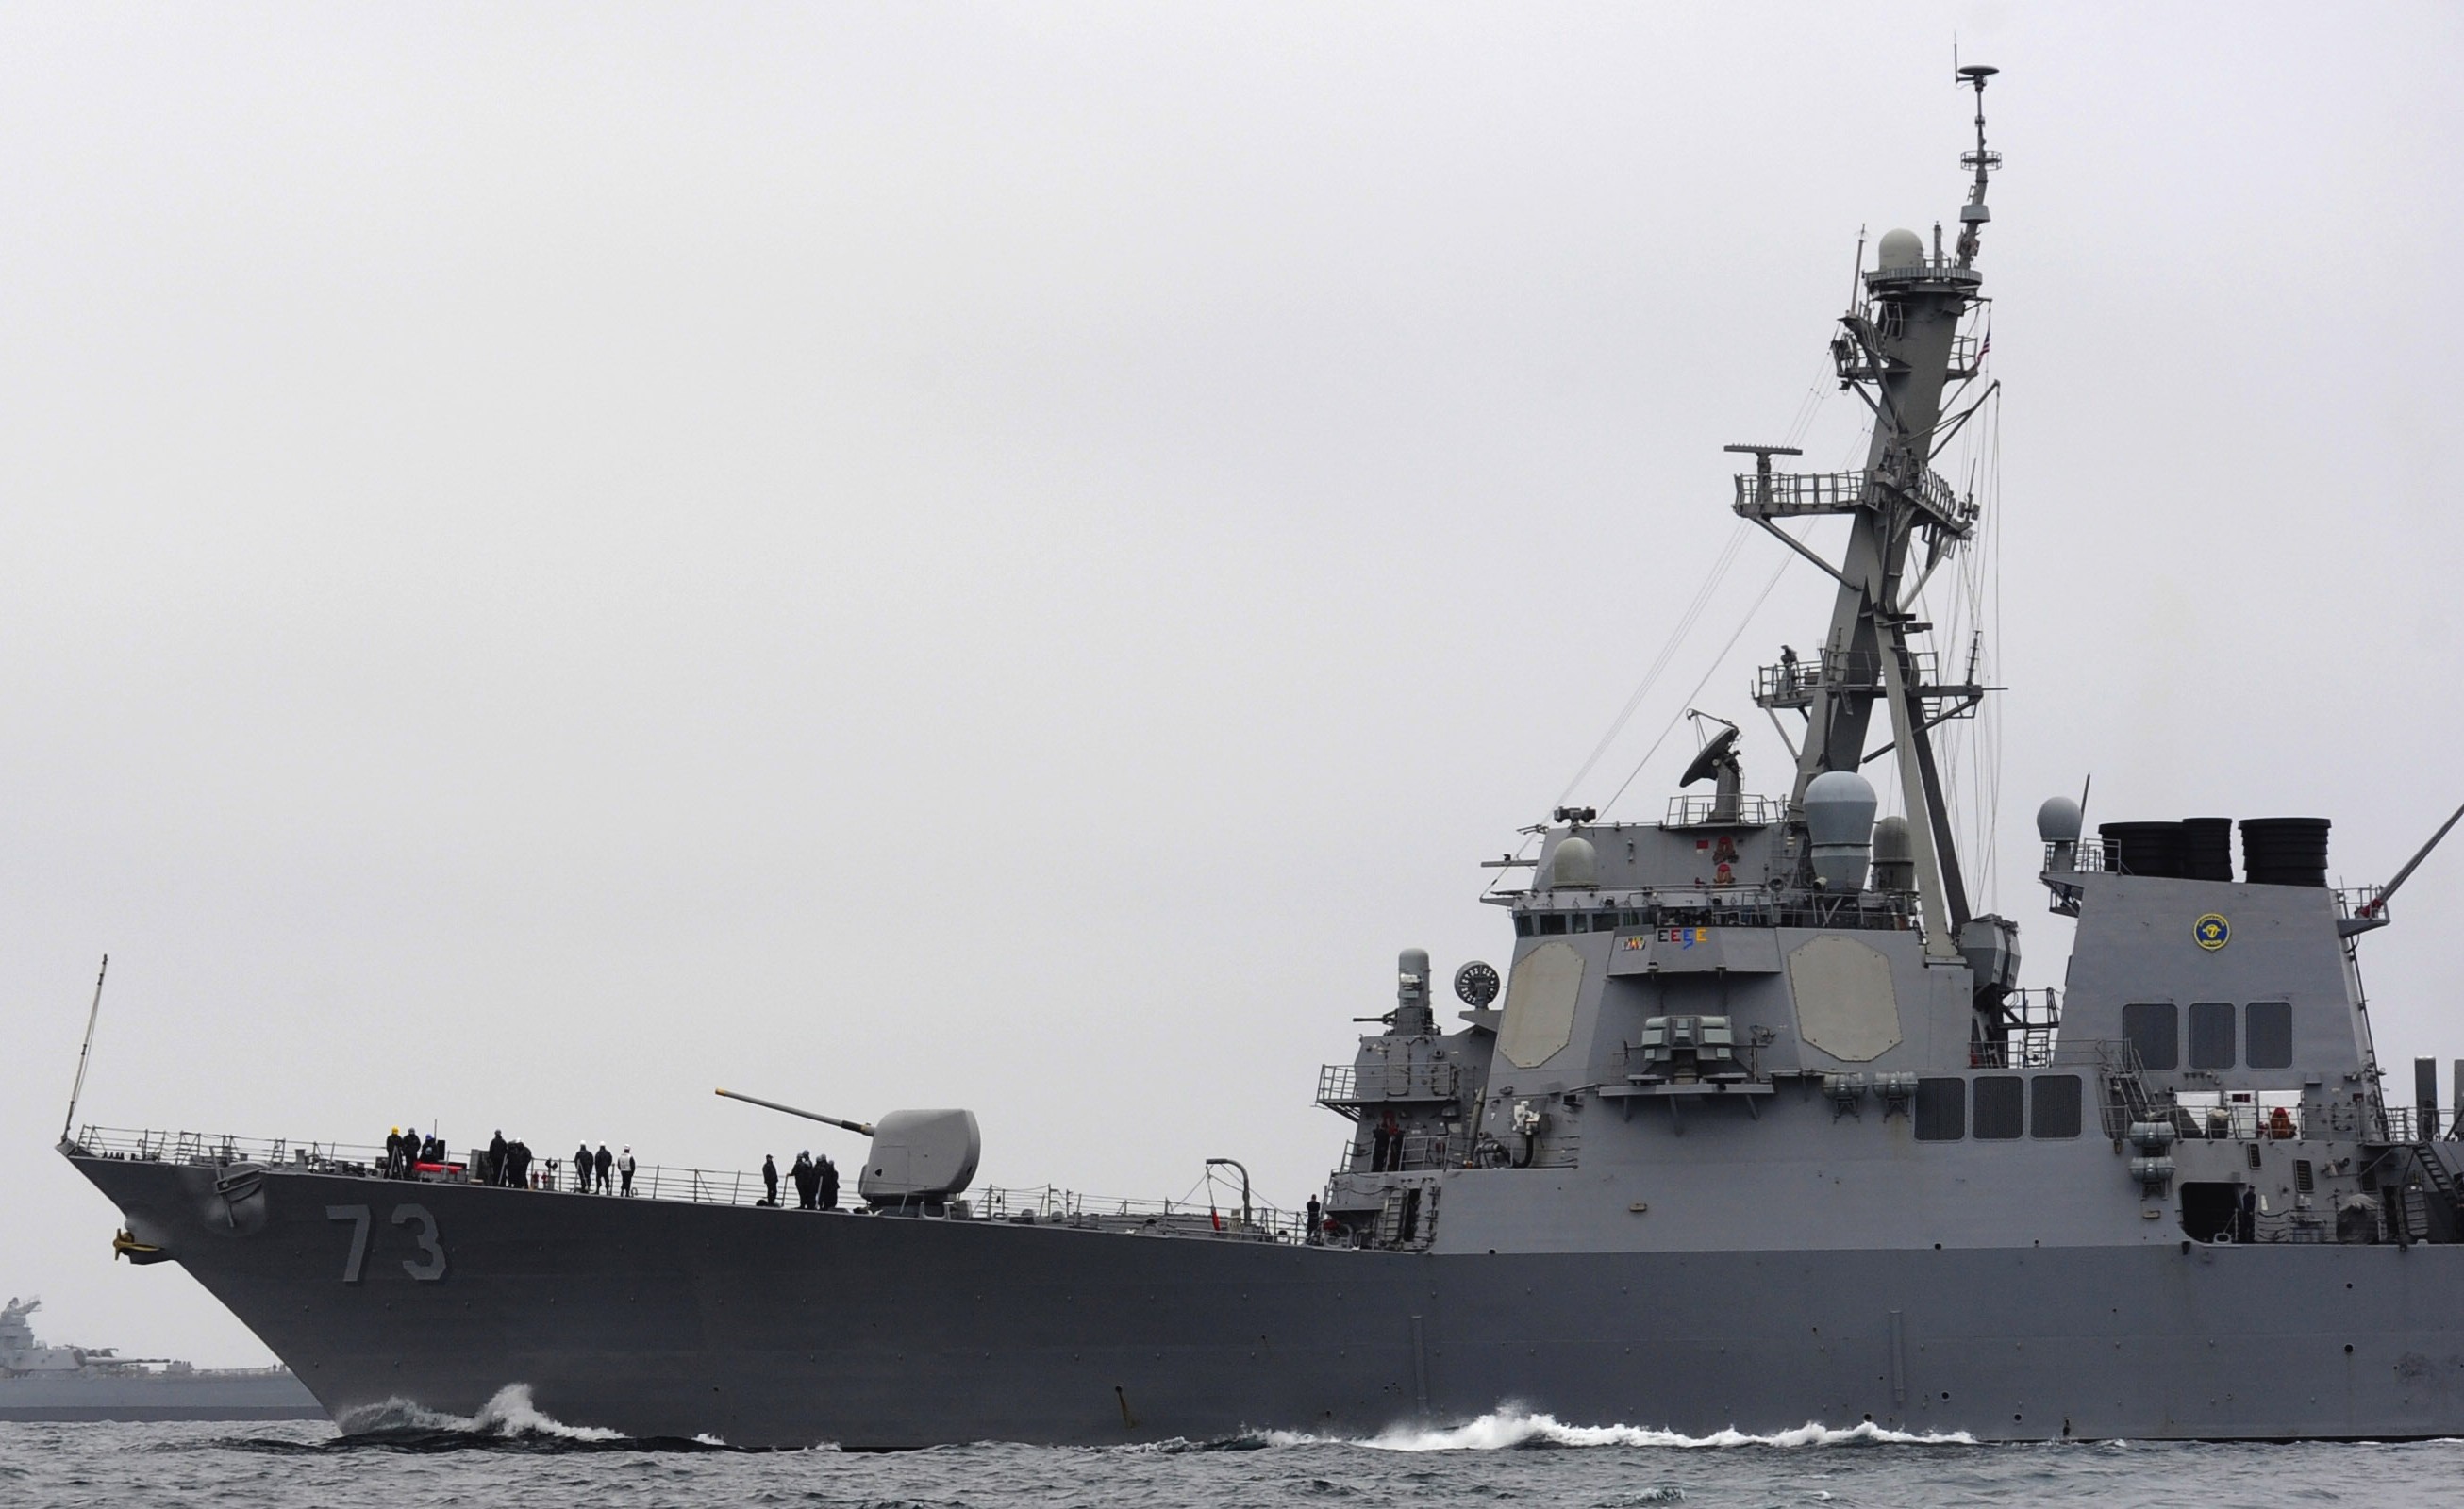 ddg-73 uss decatur guided missile destroyer arleigh burke class aegis bmd 26